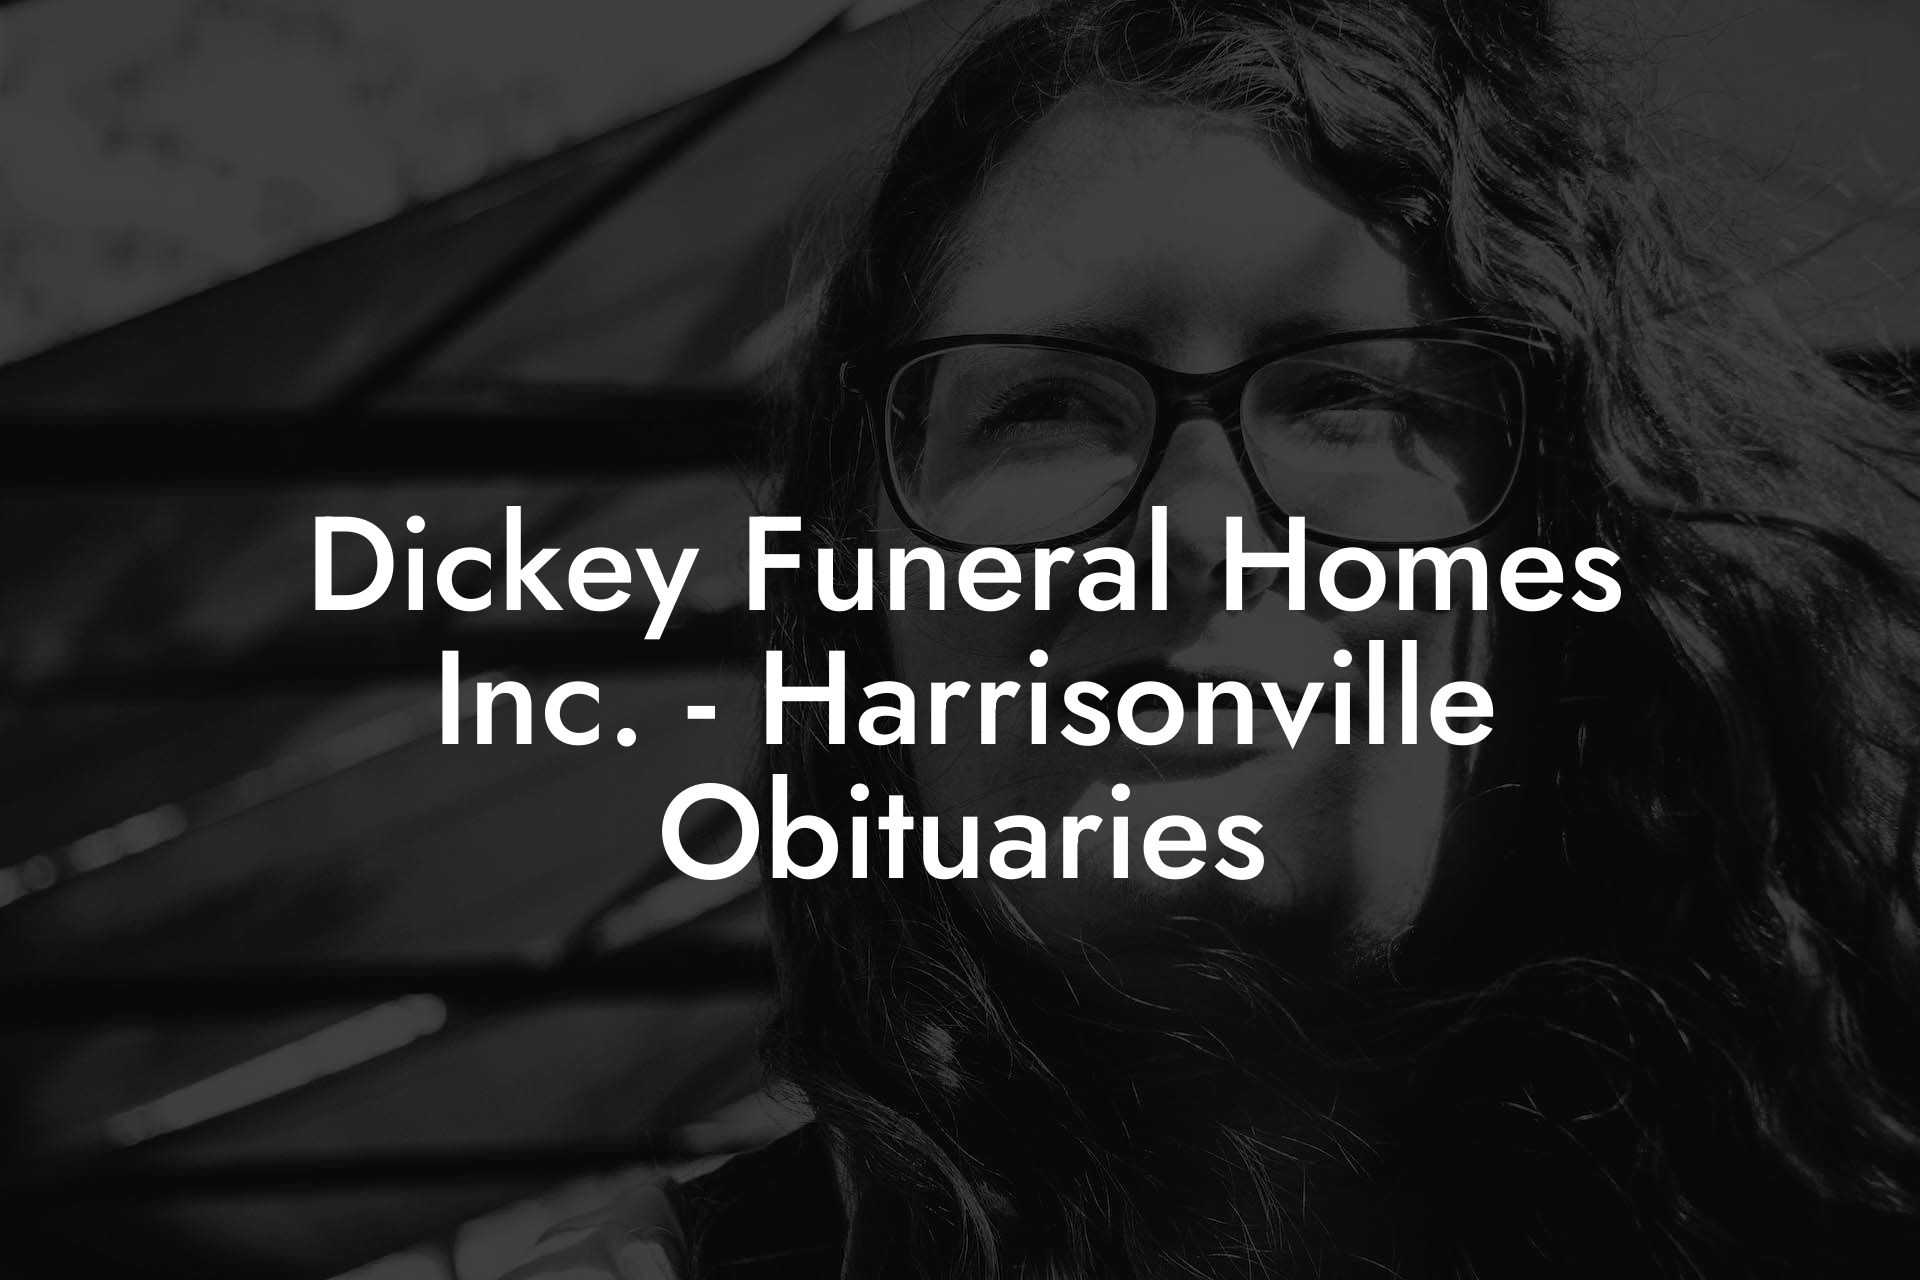 Dickey Funeral Homes Inc. - Harrisonville Obituaries